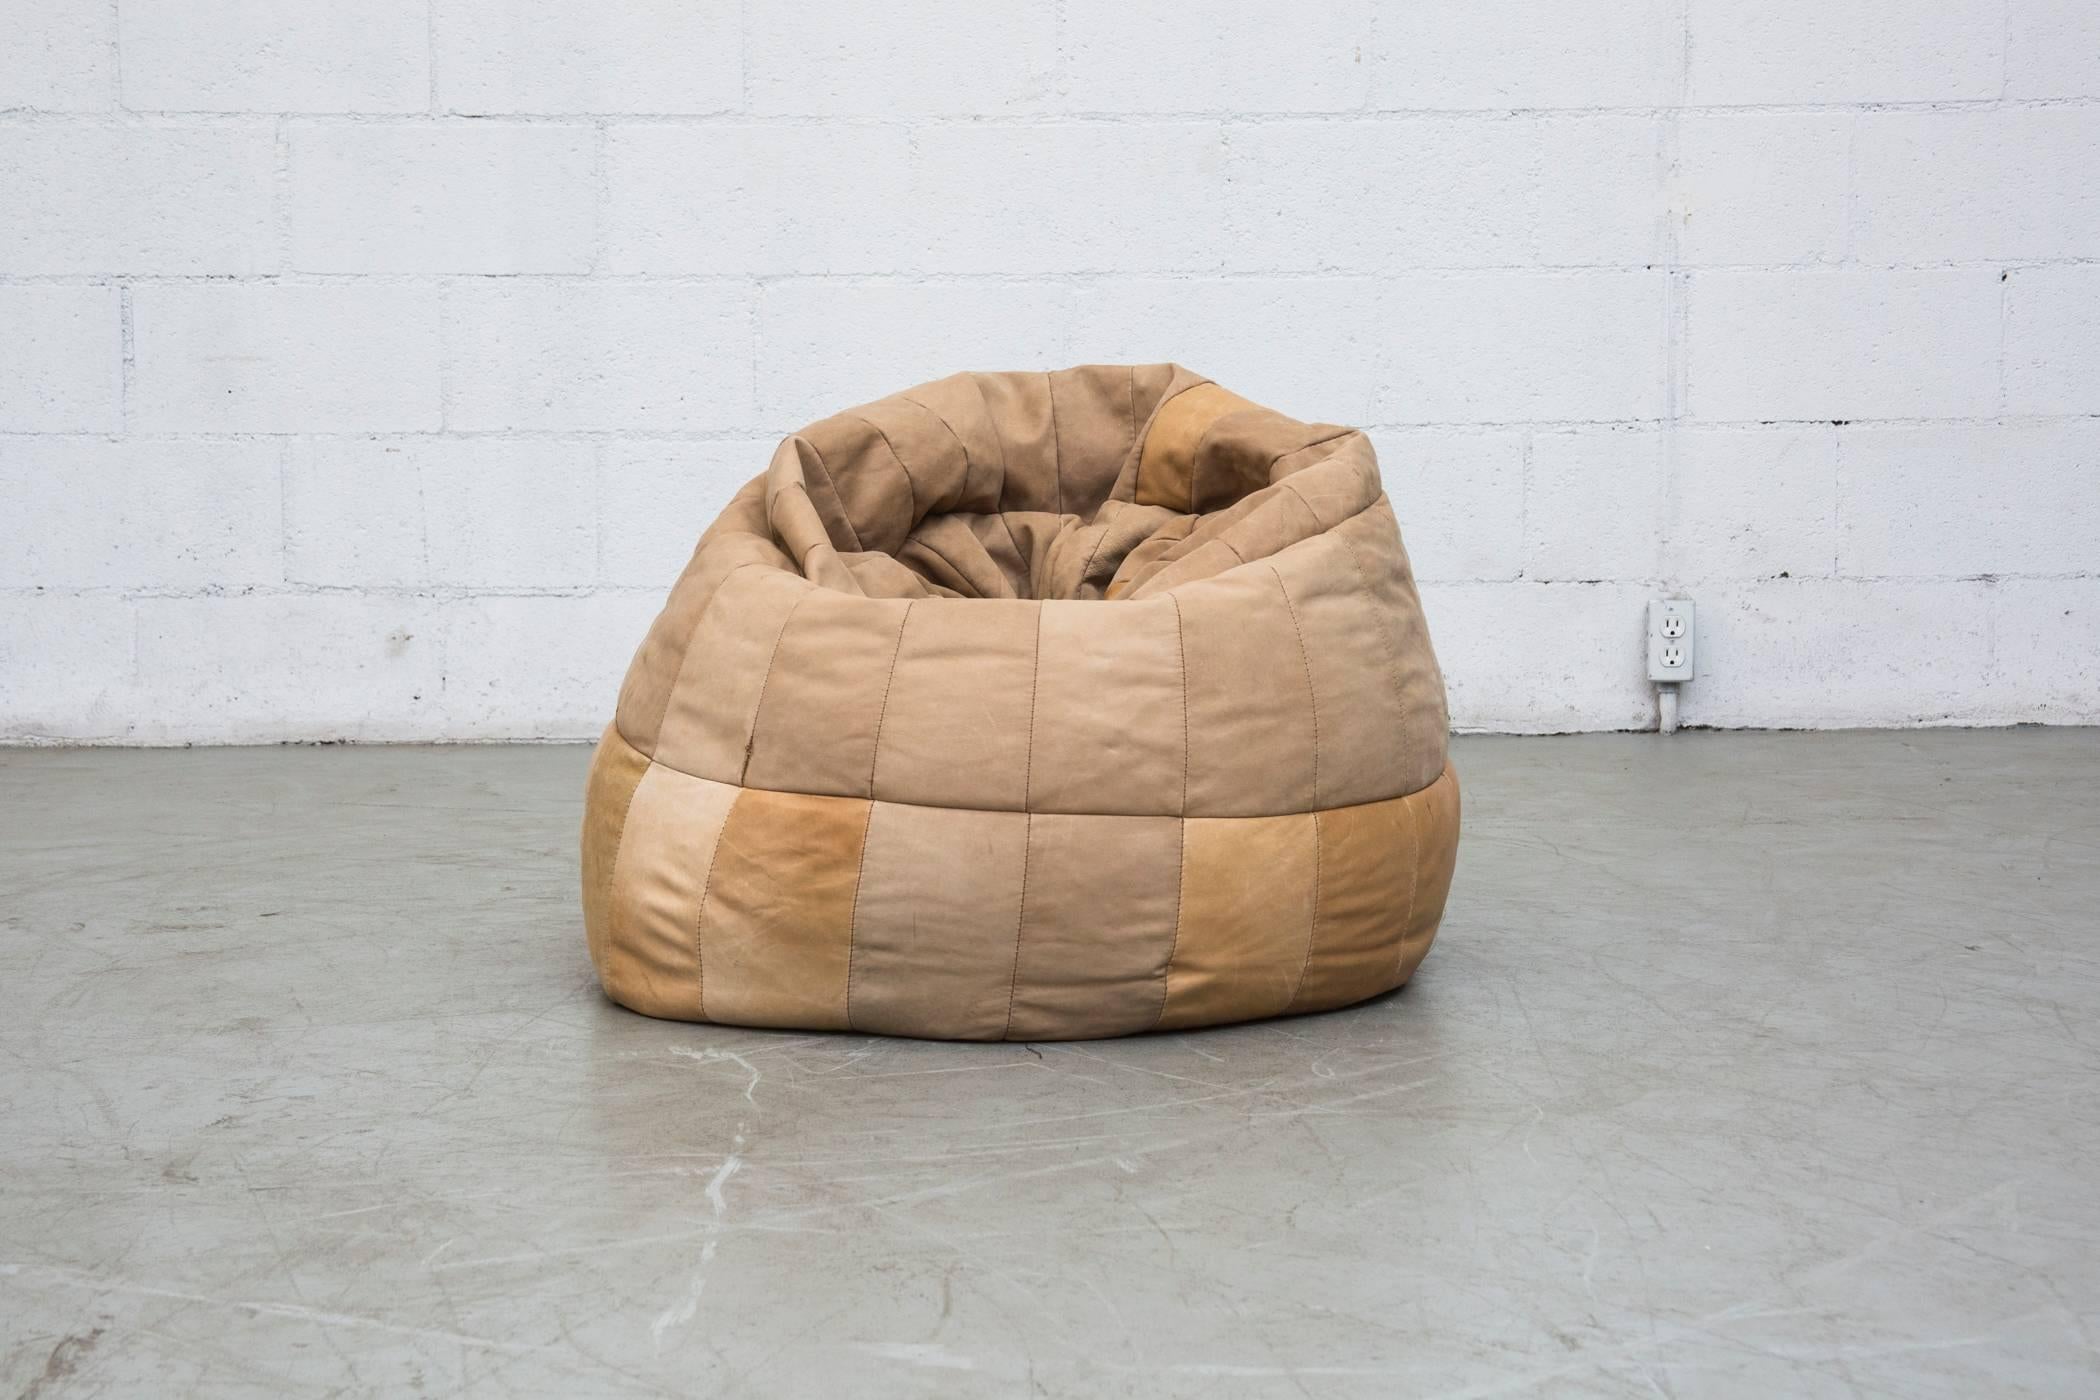 1970s De Sede style leather patchwork beanbag chair. Soft natural leather with nice patina. Small seam separation at bottom, but in overall good vintage condition.